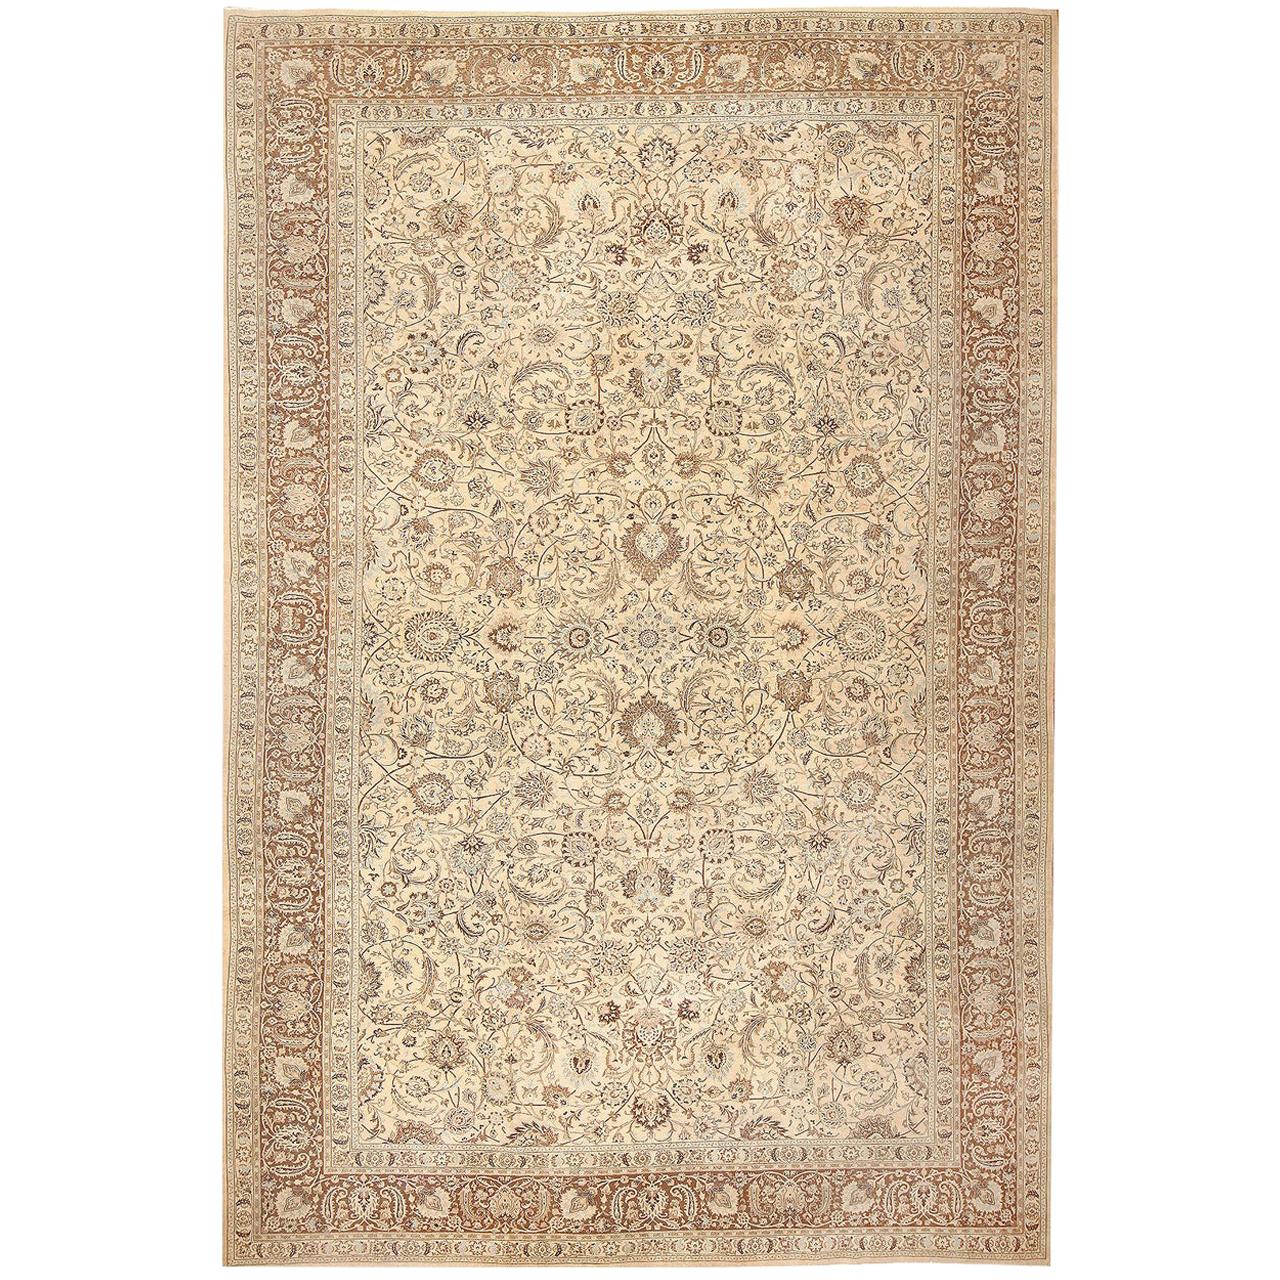 Antique Brown Khorassan Rug. Size: 15 ft 4 in x 23 ft 8 in